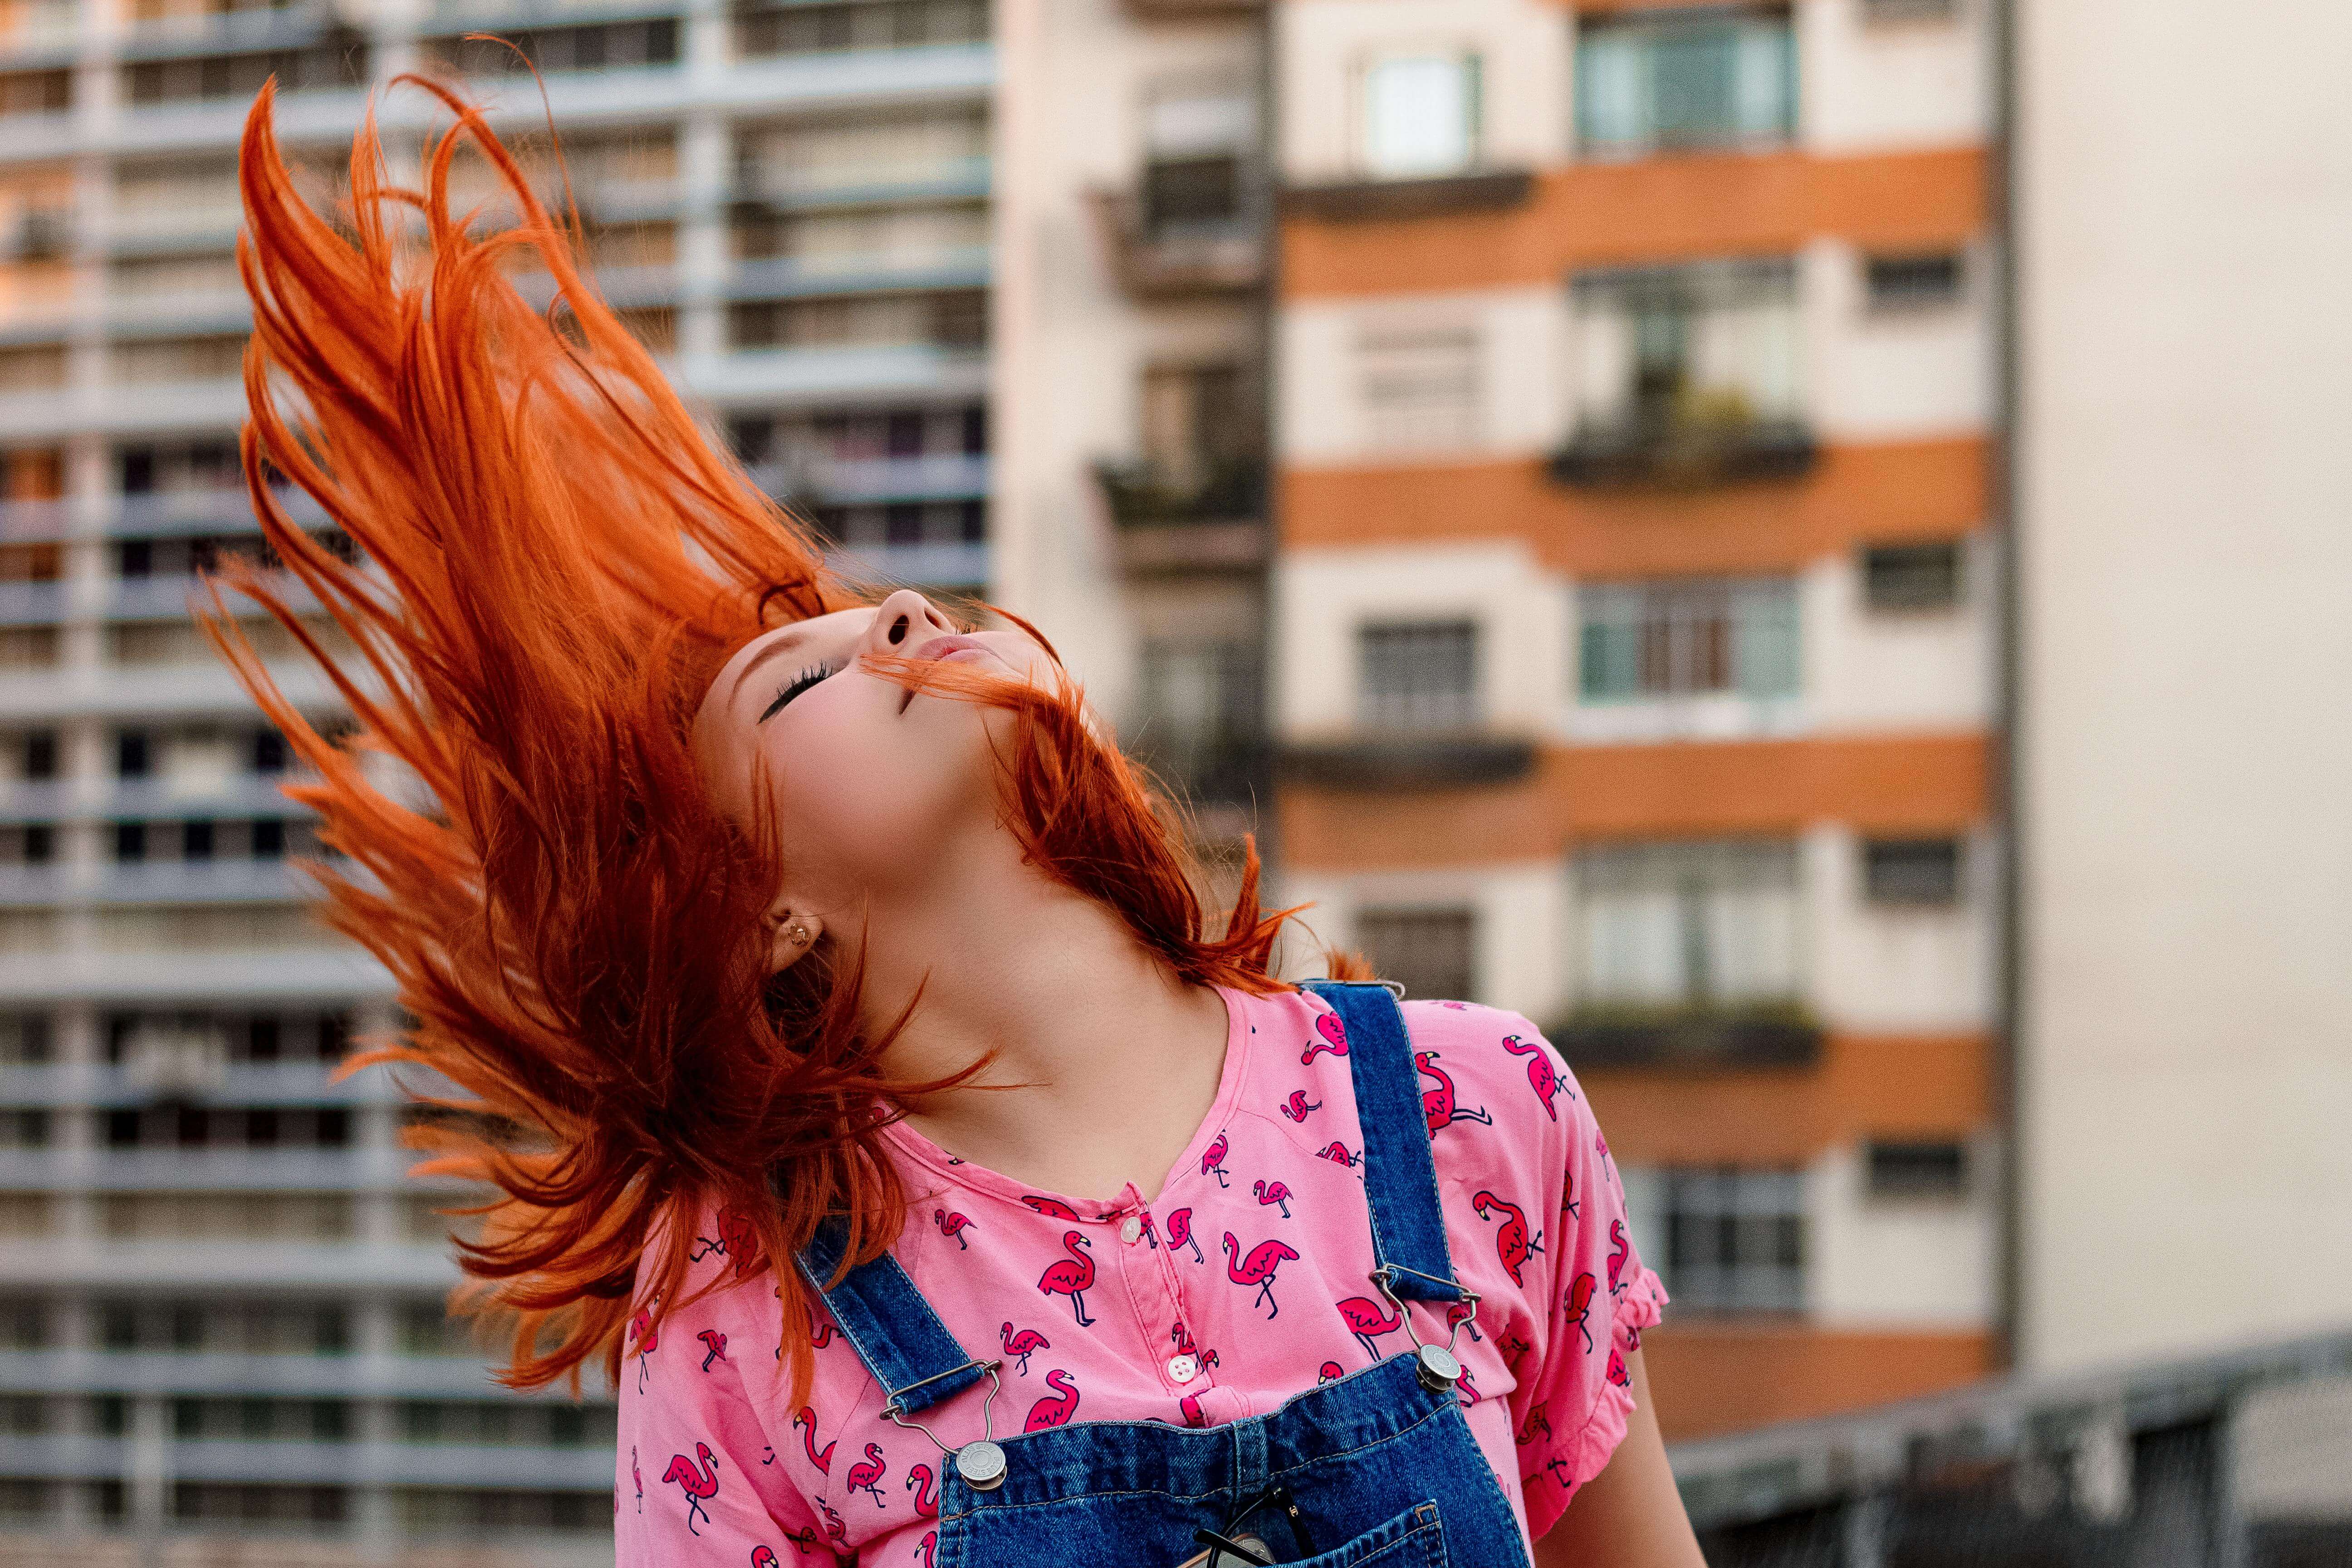 red-headed woman flipping her hair